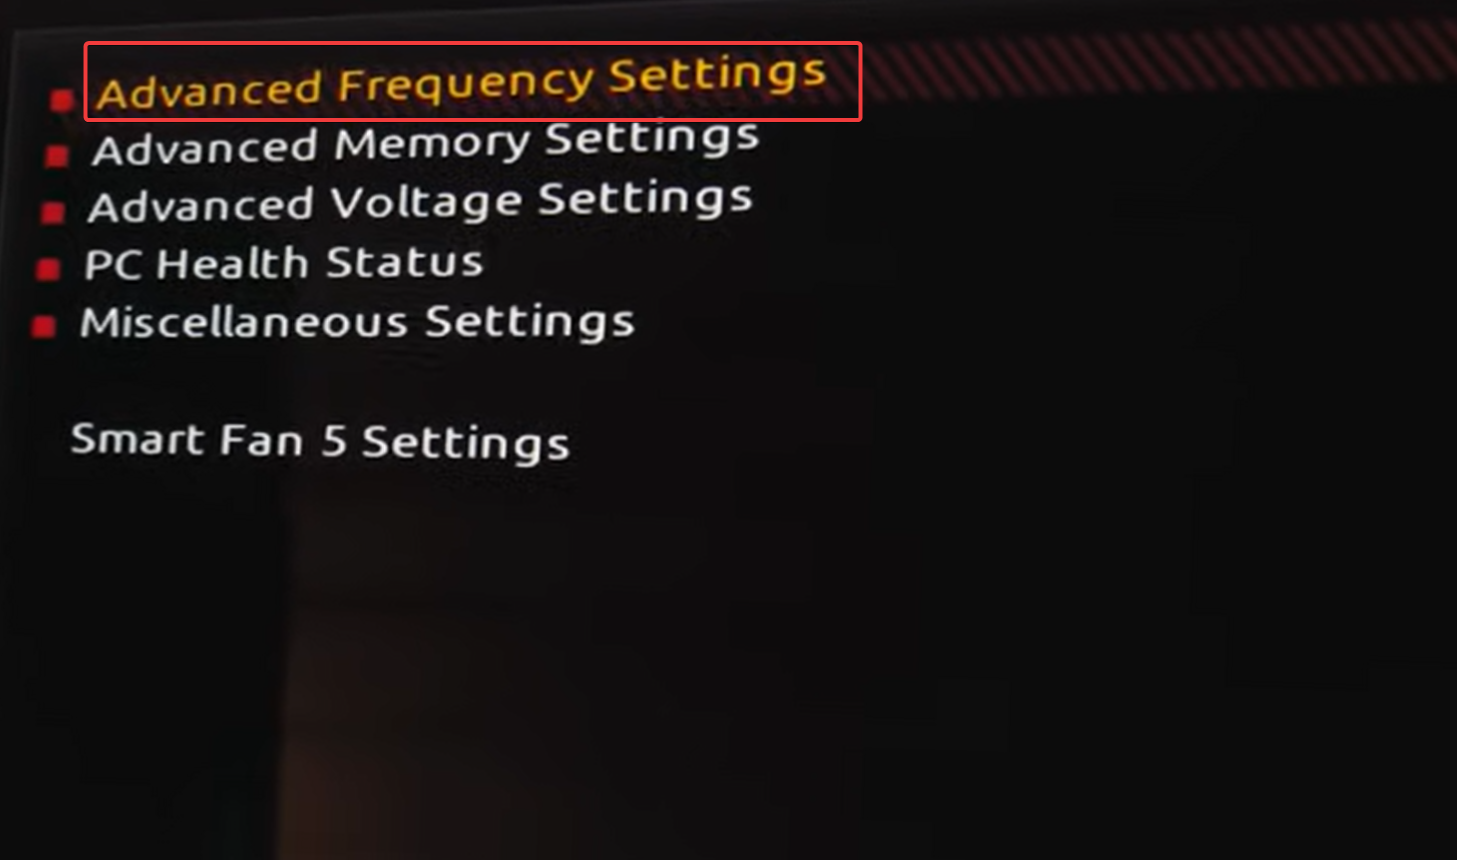 advanced frequency settings